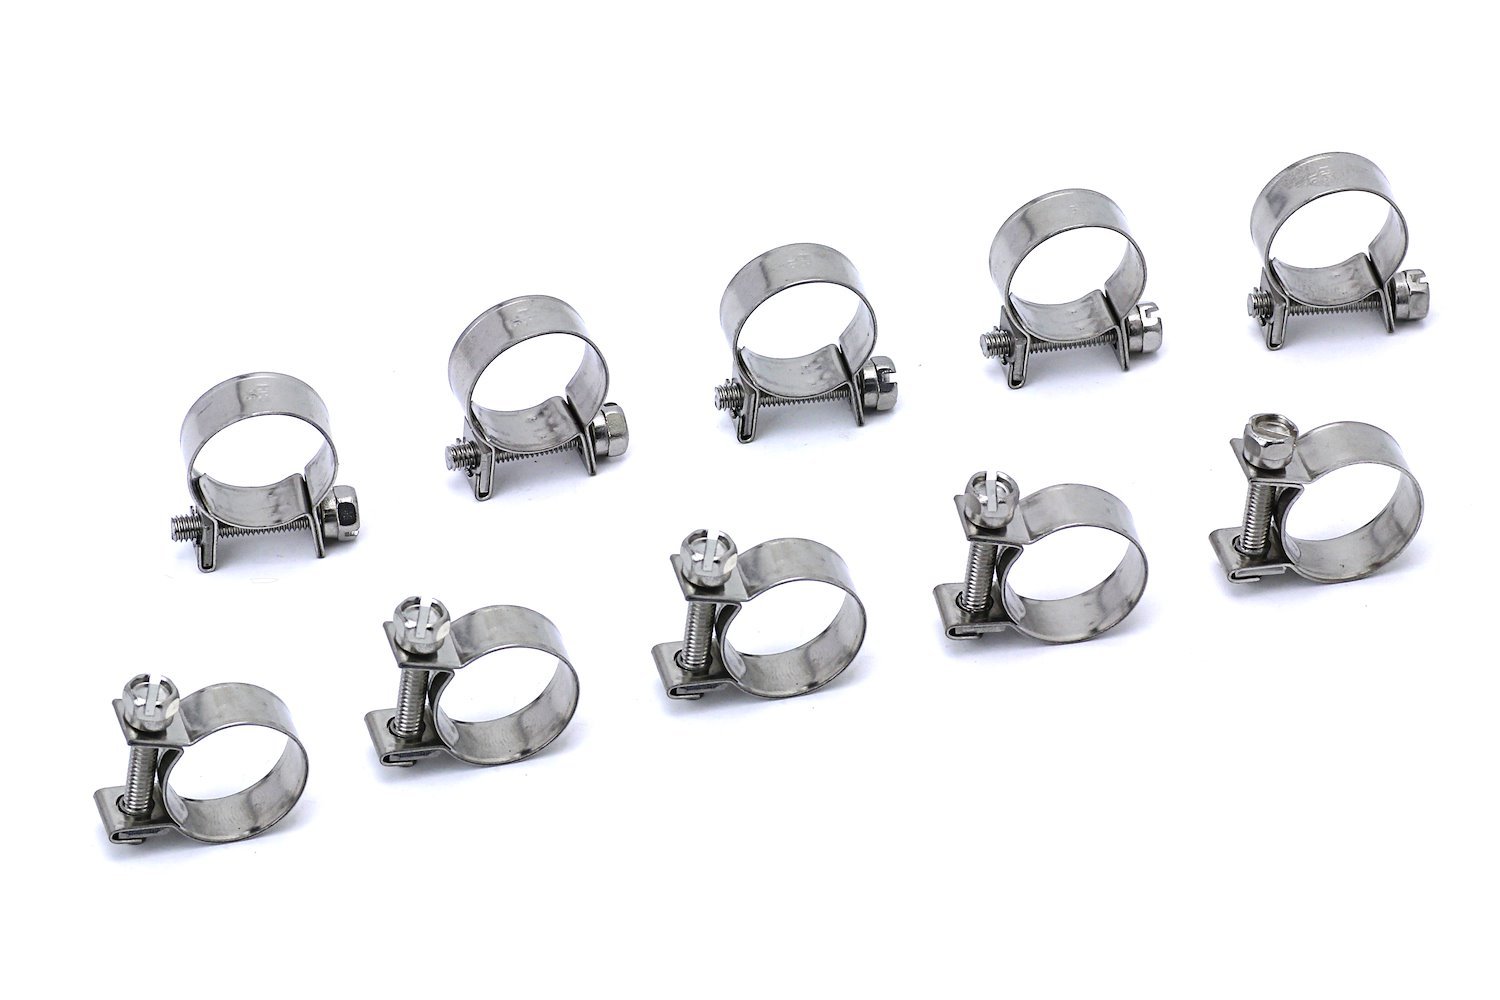 FIC-13x10 Fuel Injection Hose Clamp, 10 Stainless Steel Small Hose Clamps, SAE Size 15, 1/2 in. - 19/32 in. (13 mm-15 mm)